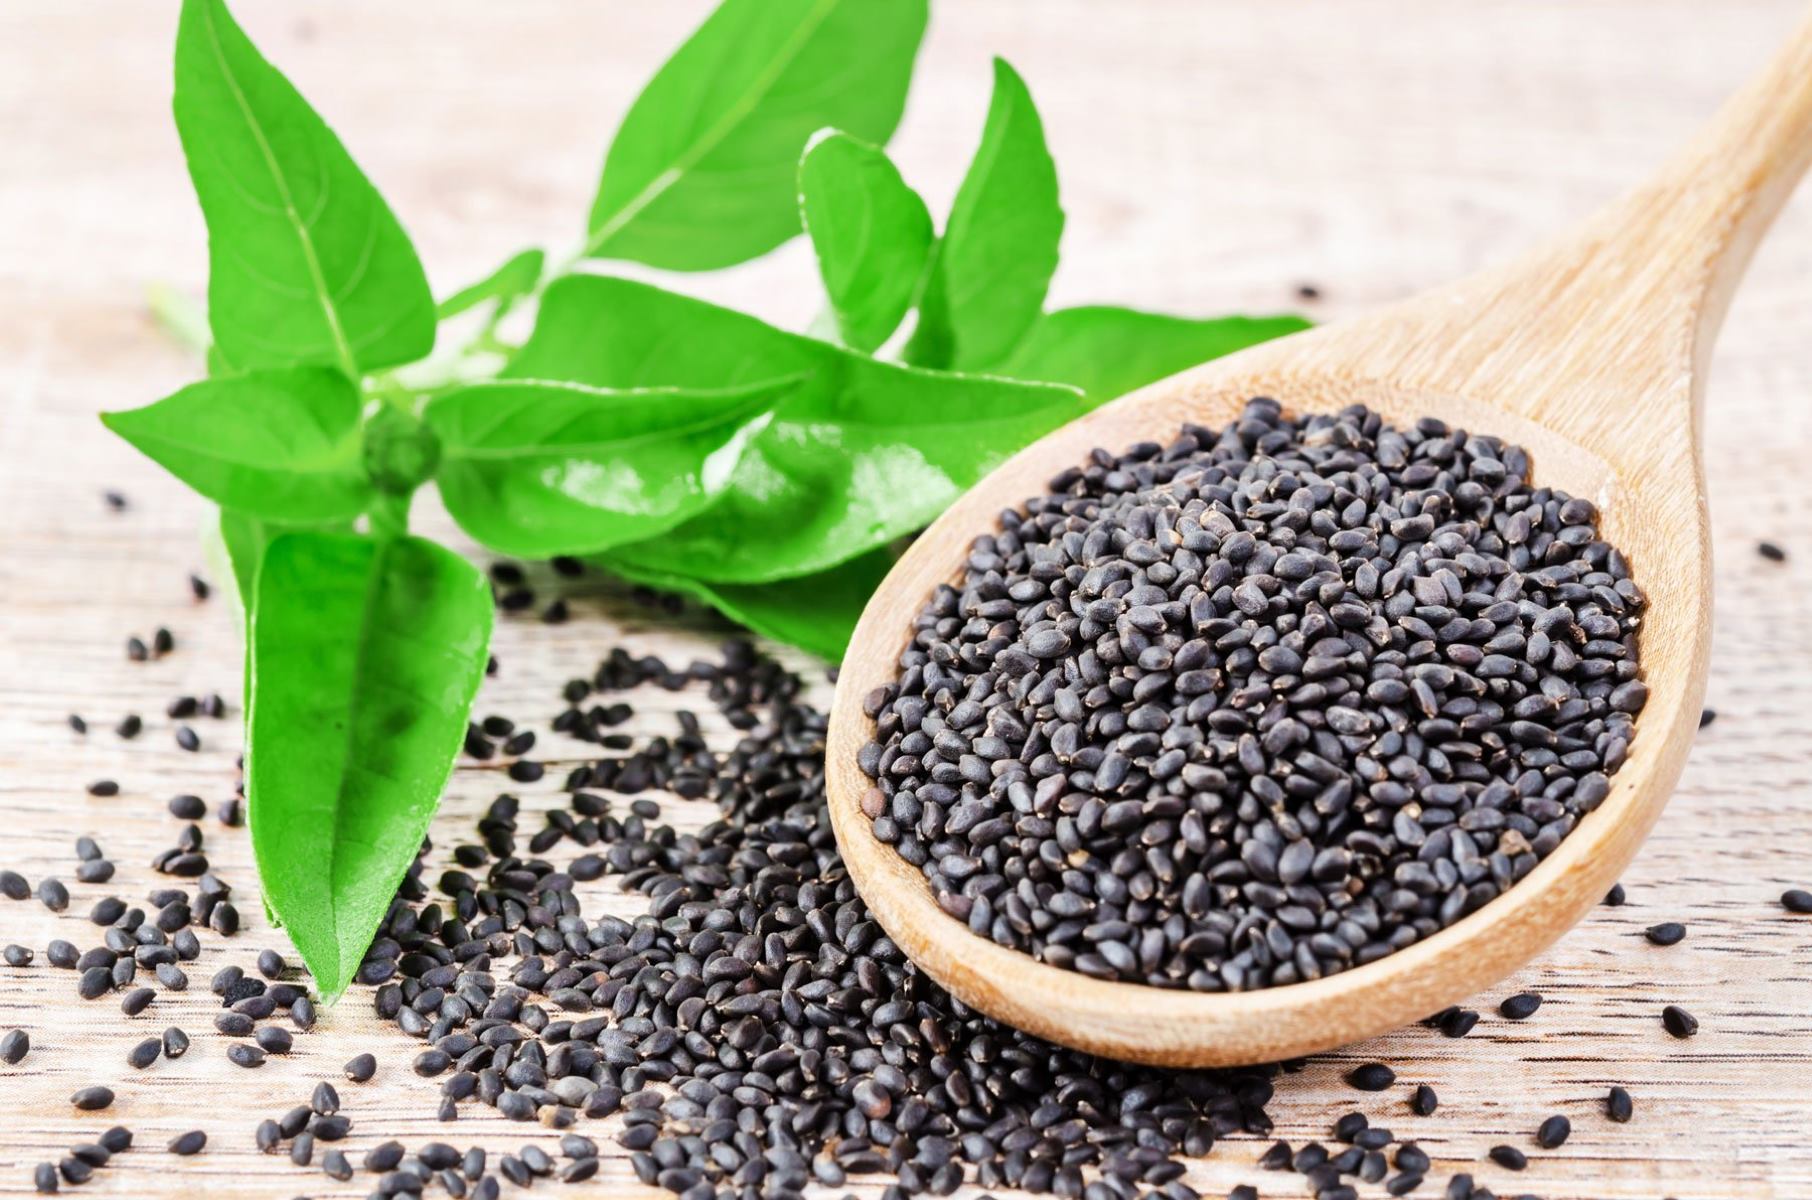 How To Eat Basil Seeds